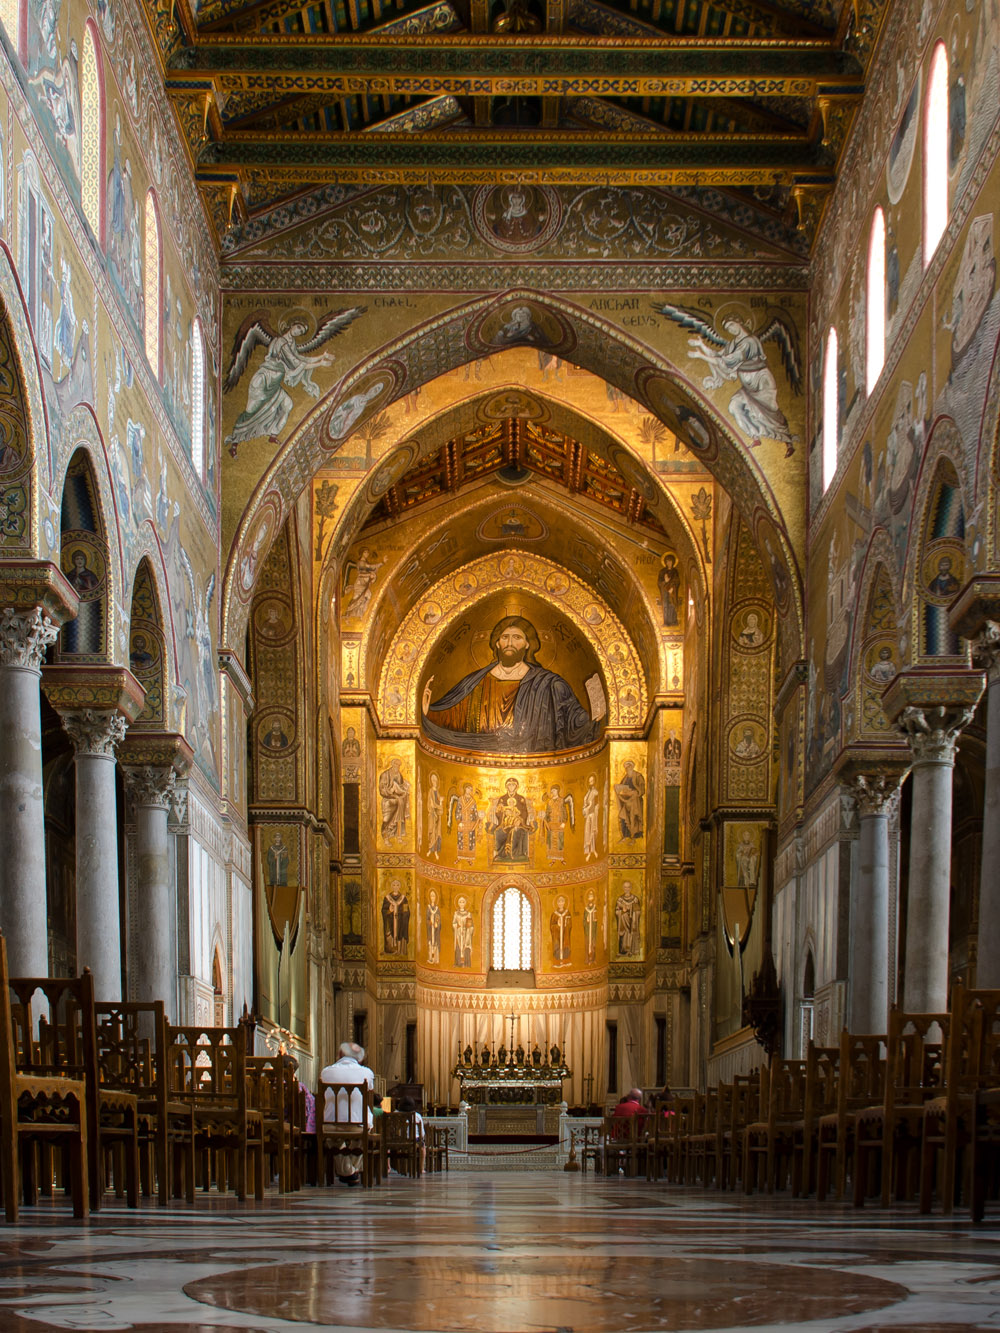 Interior of the Monreale Cathedral in Sicily, Italy